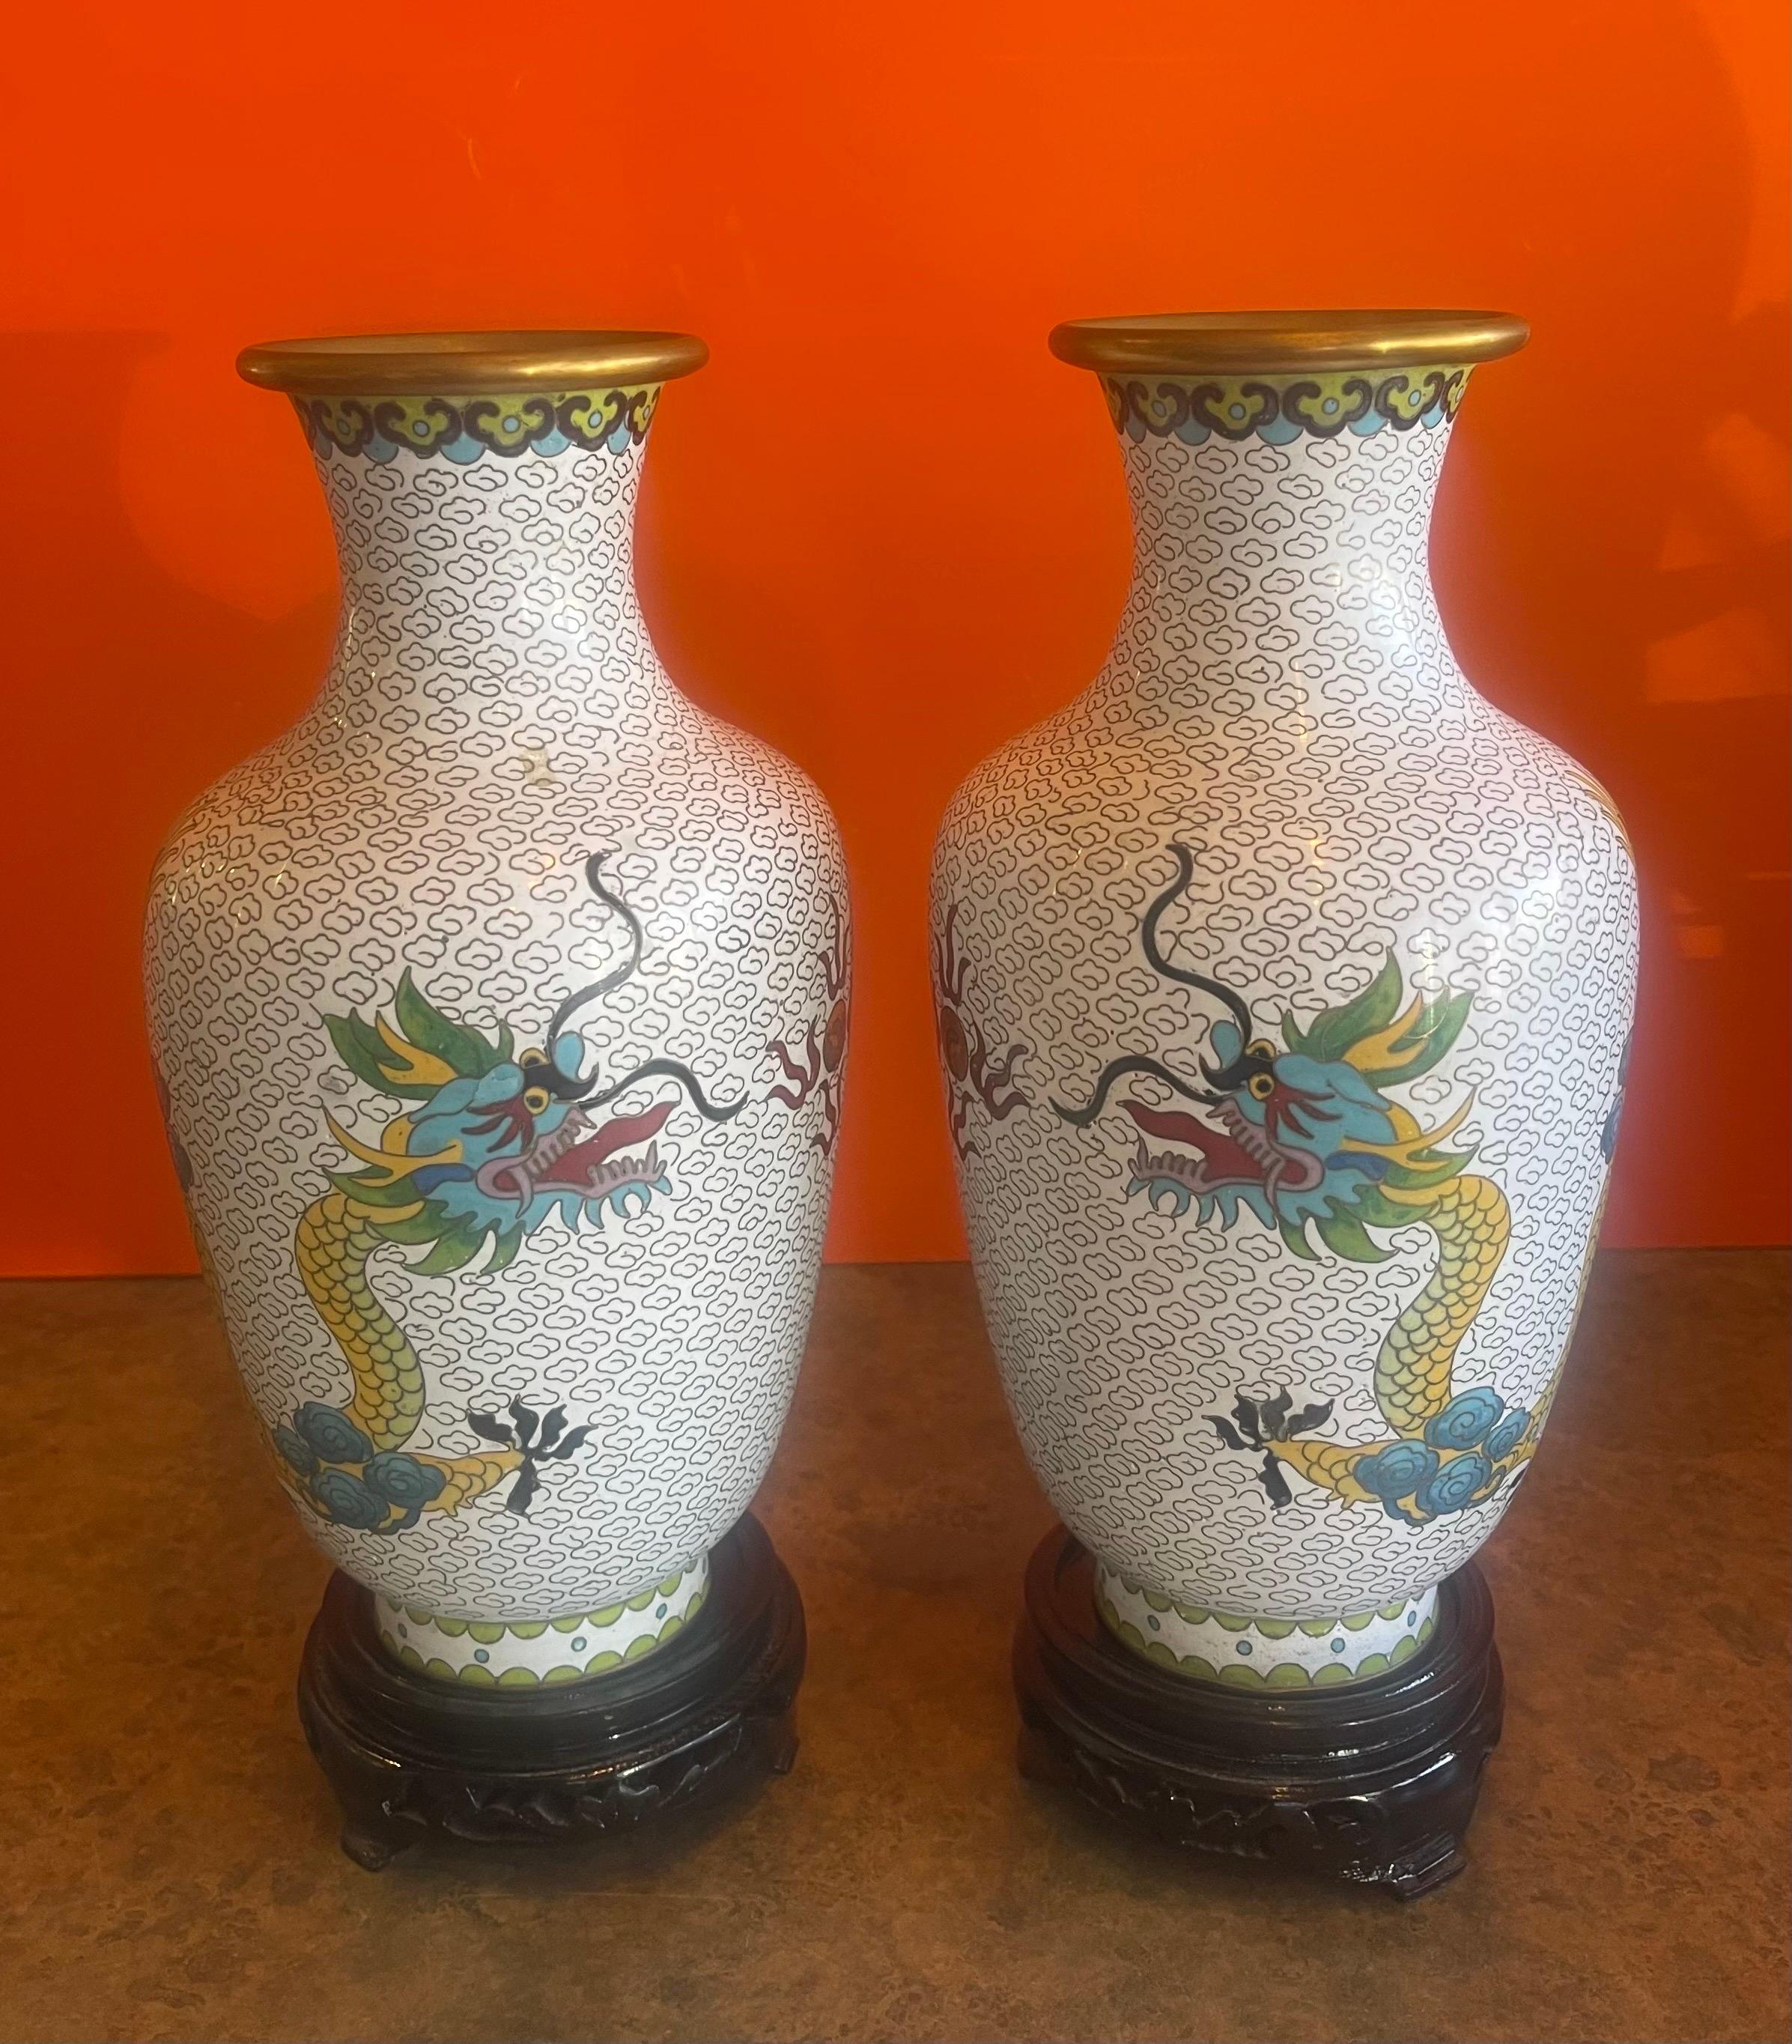 20th Century Mirrored Pair of Chinese Cloisonne Vases with Dragon Motif For Sale